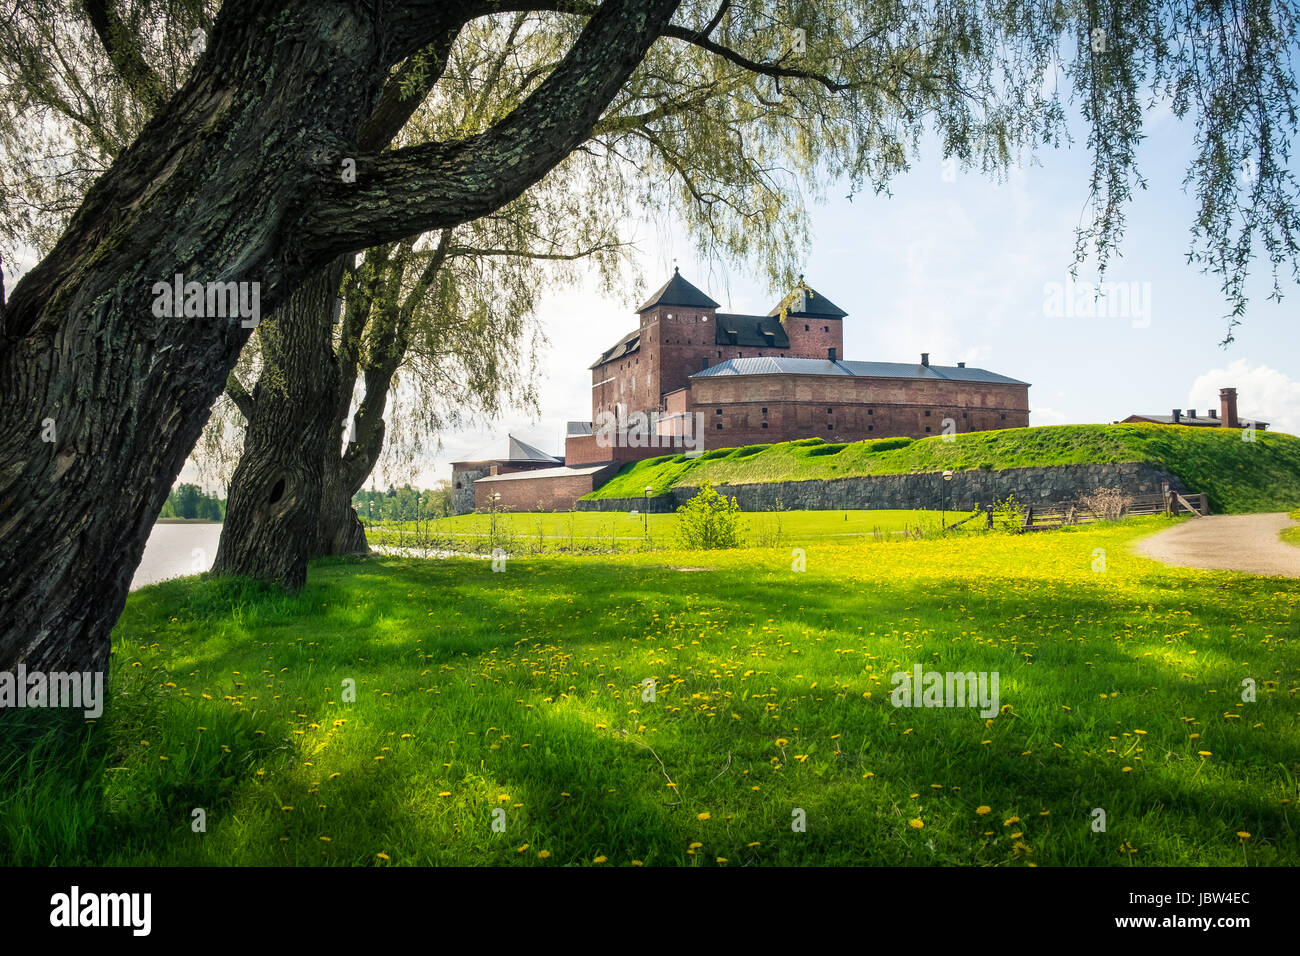 Medieval castle in the city of Hameenlinna, Finland at spring Stock Photo